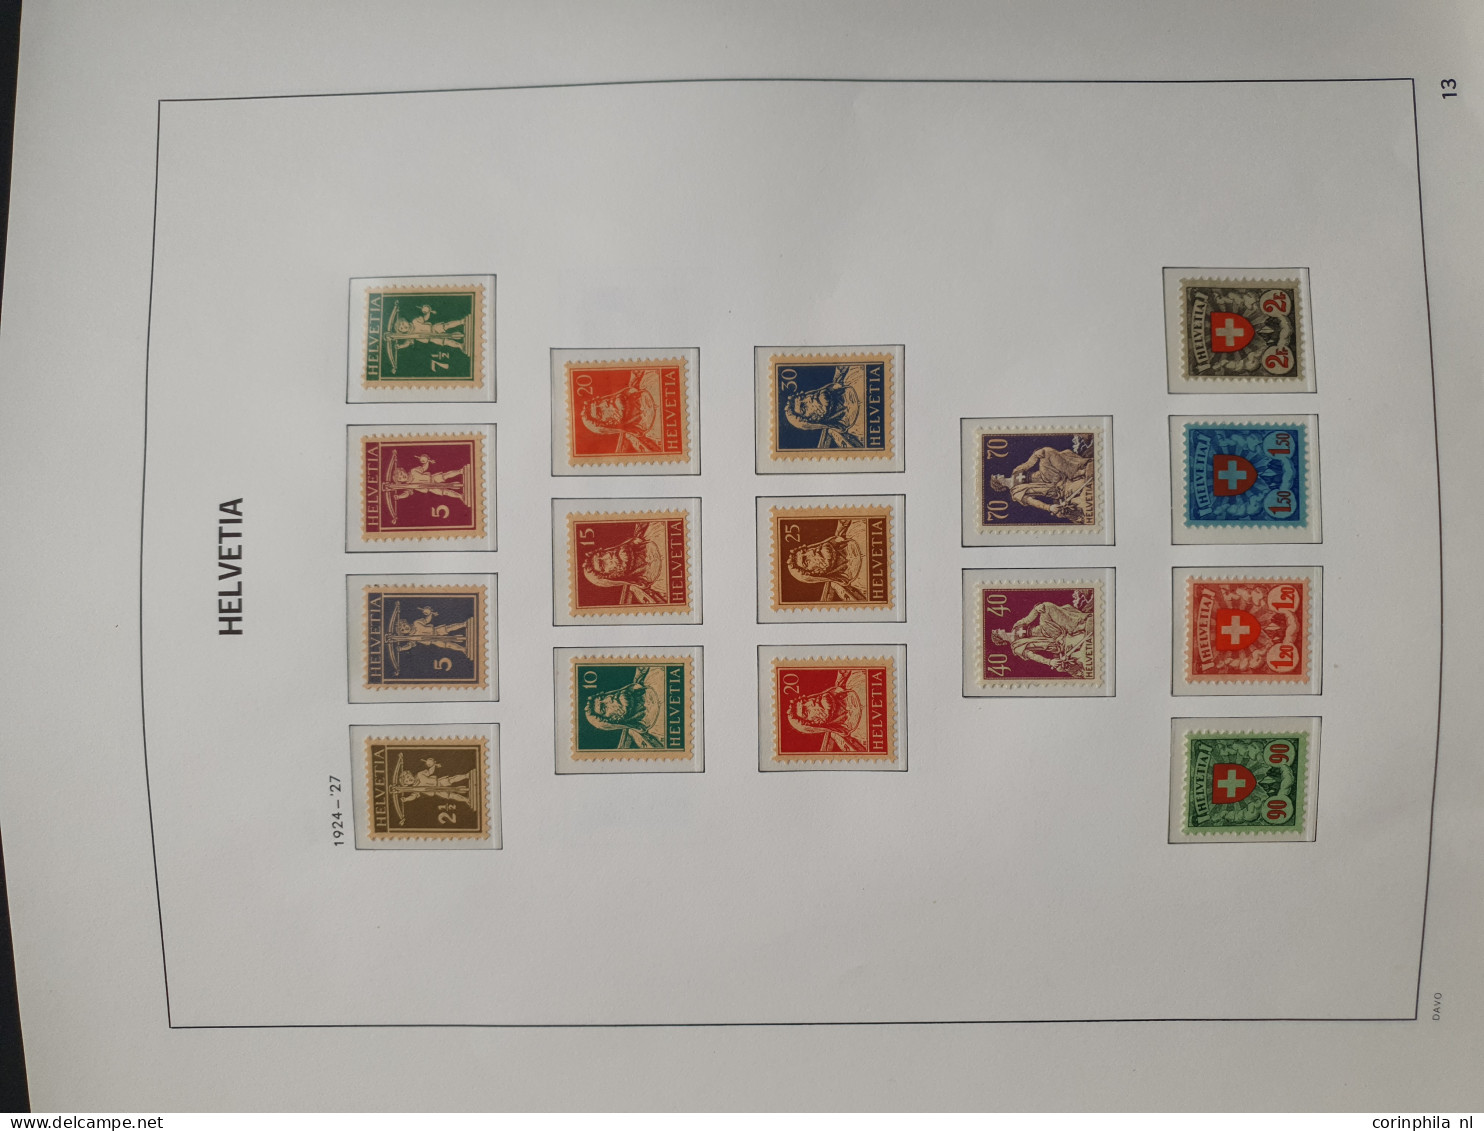 1846-1950 collection used and */** including many better items including Mi. 4 (*) Moser certificate, 10-12, Pro Juventu